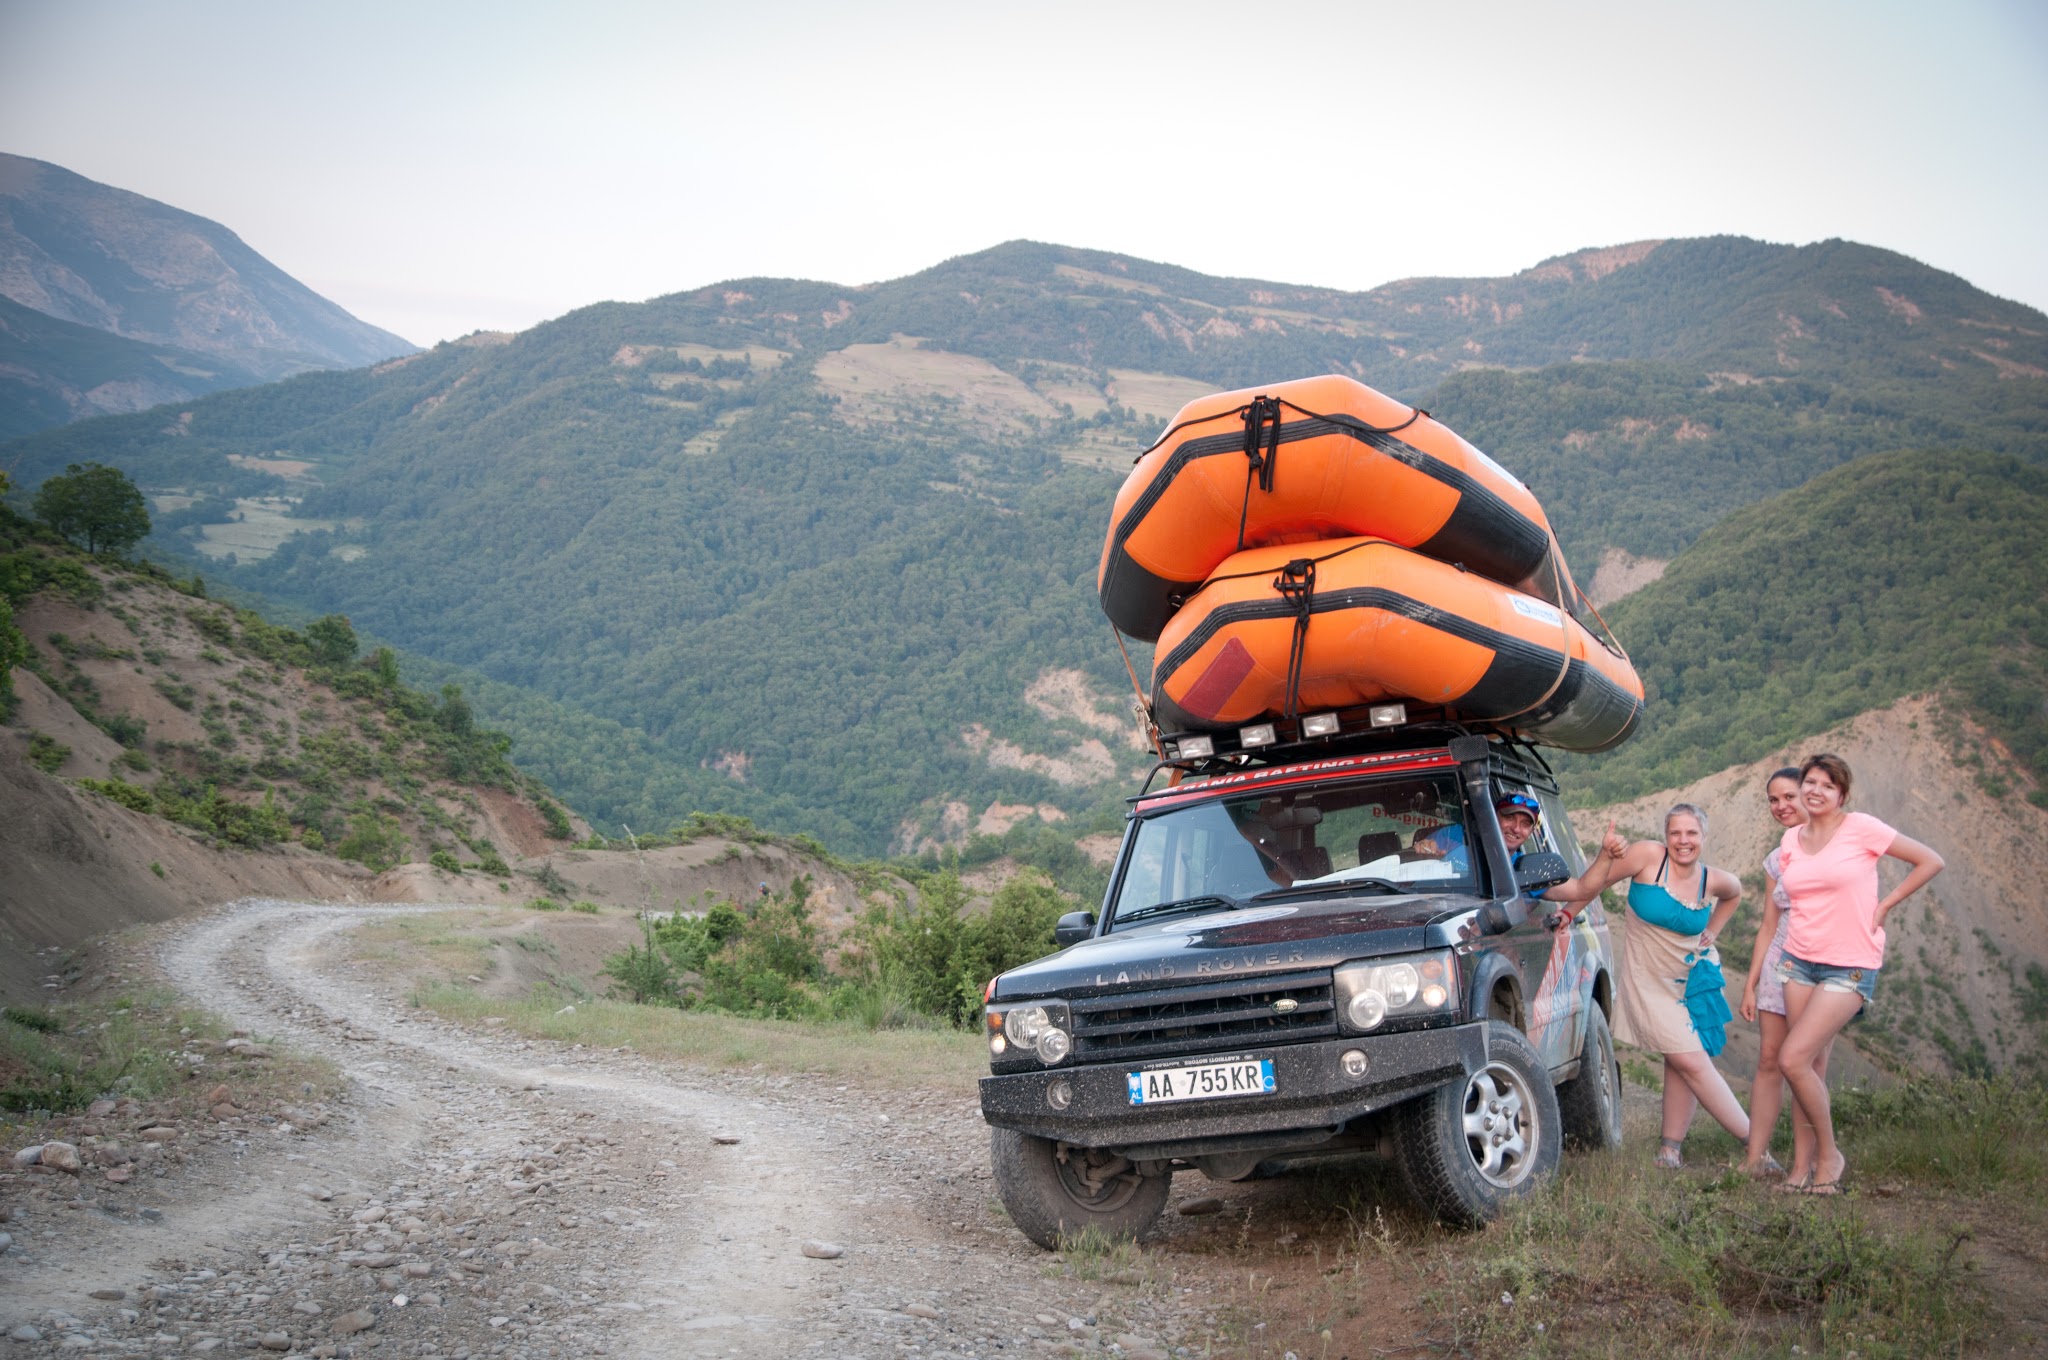 Post-rafting on Osumi, in the Albanian mountains